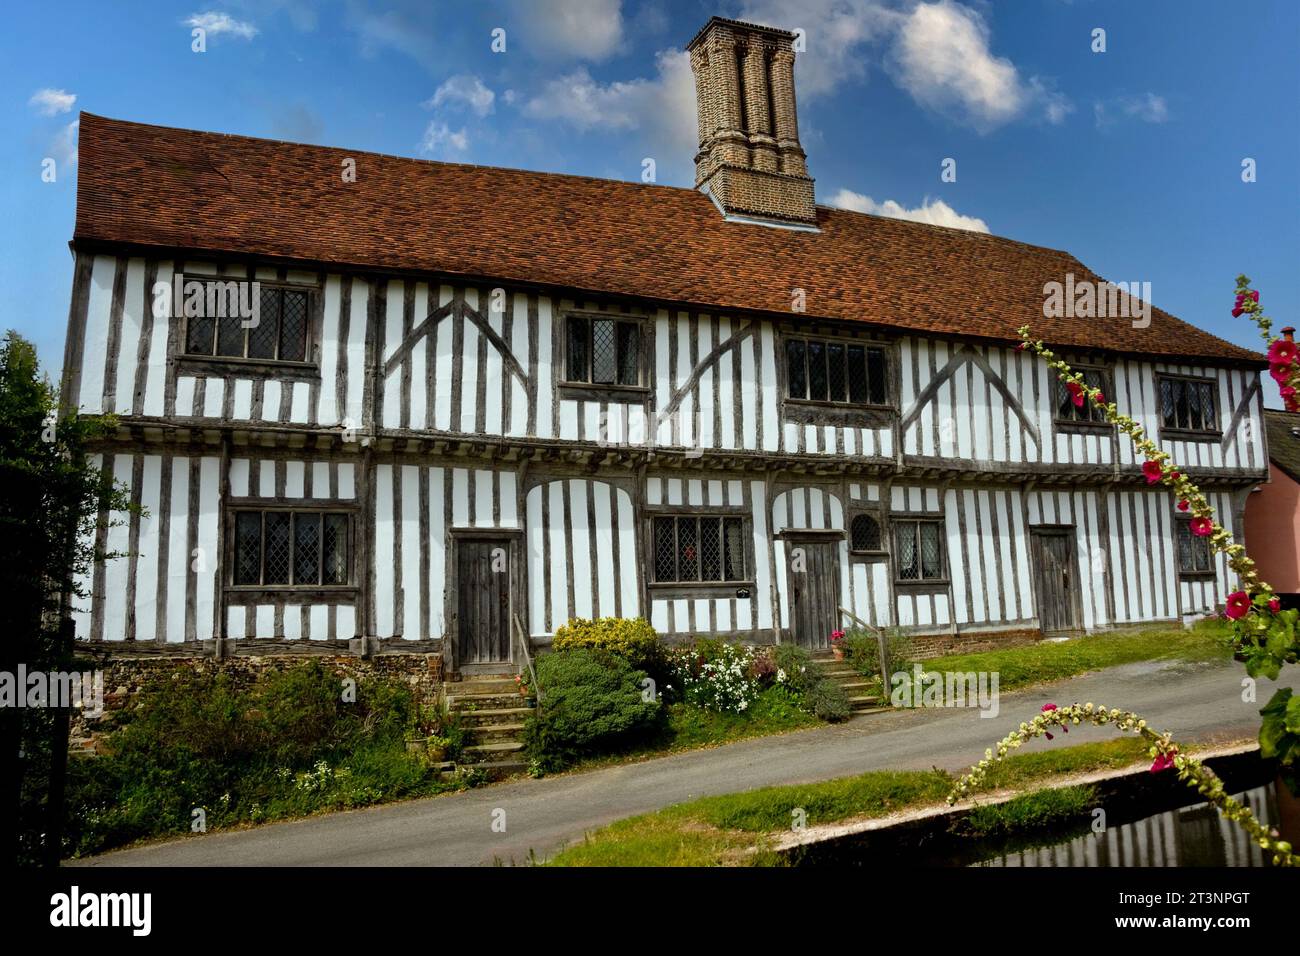 The Old Guildhall, Stoke-by-Nayland, Suffolk, England Stock Photo